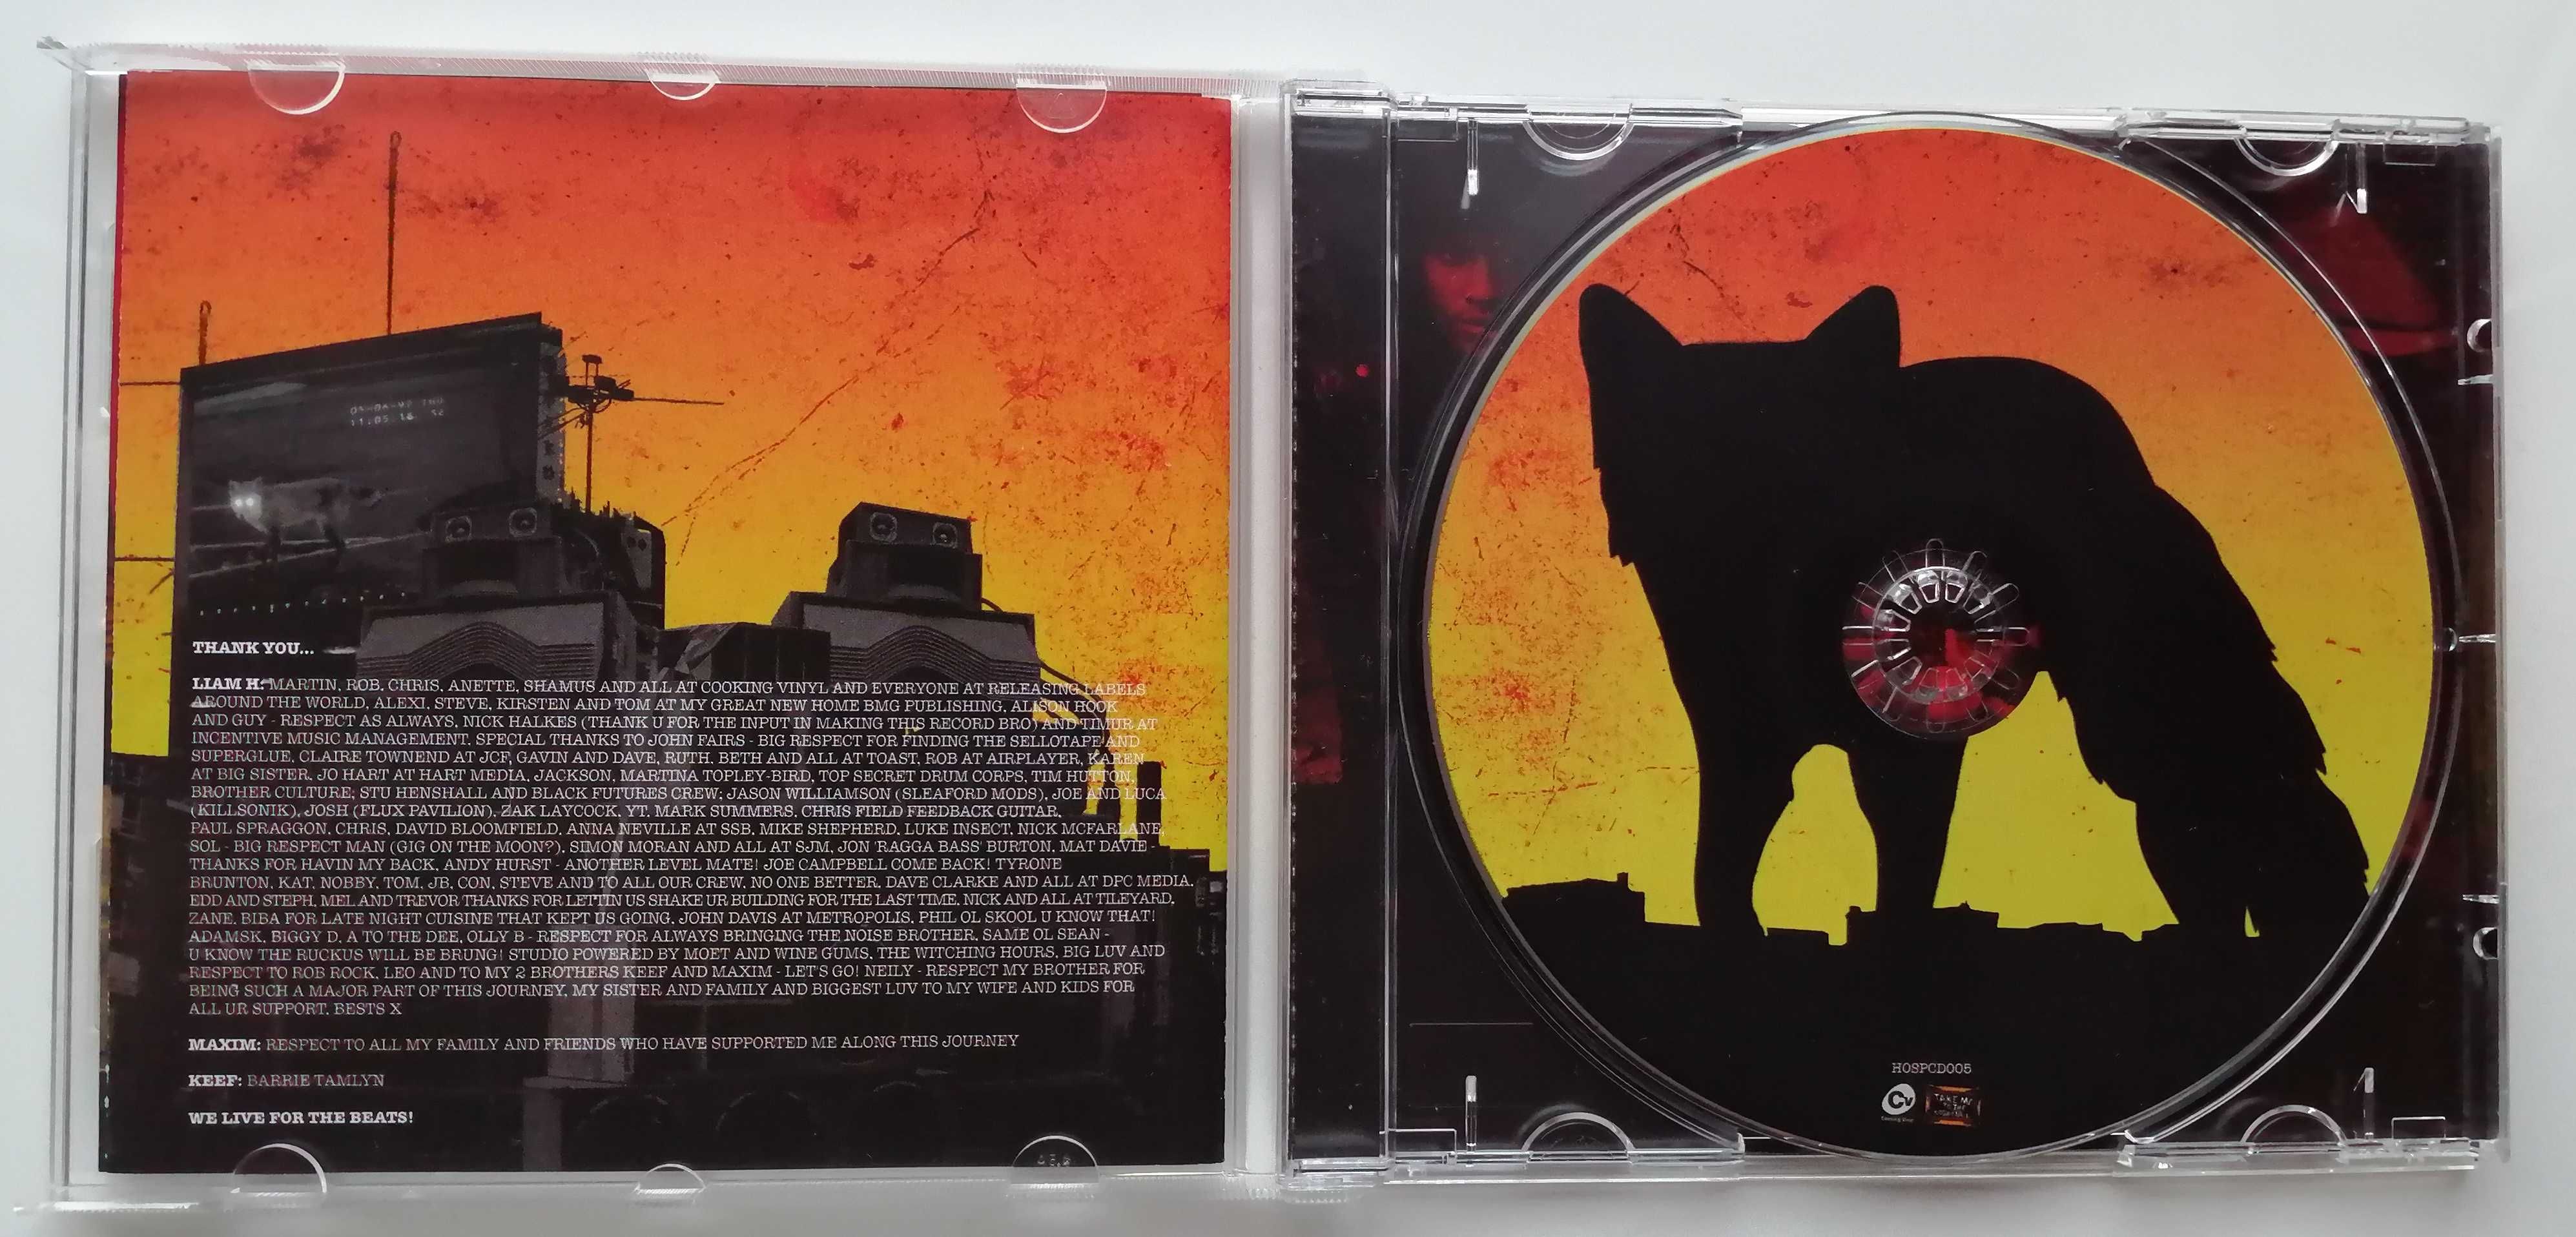 CD The Prodigy - The Day is My Enemy